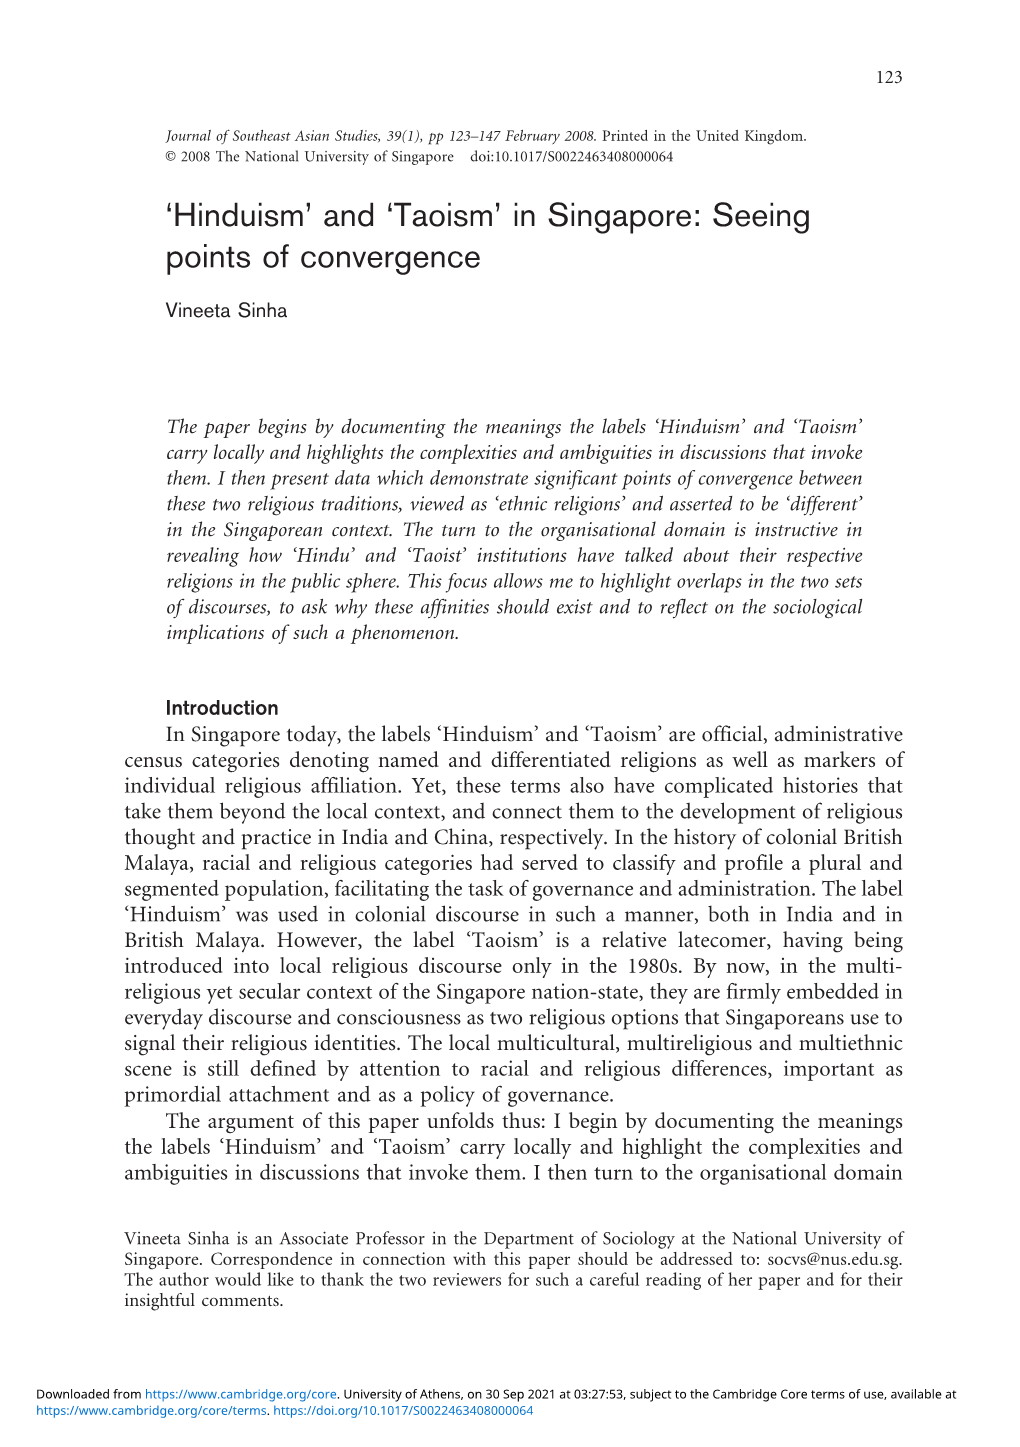 'Hinduism' and 'Taoism' in Singapore: Seeing Points of Convergence